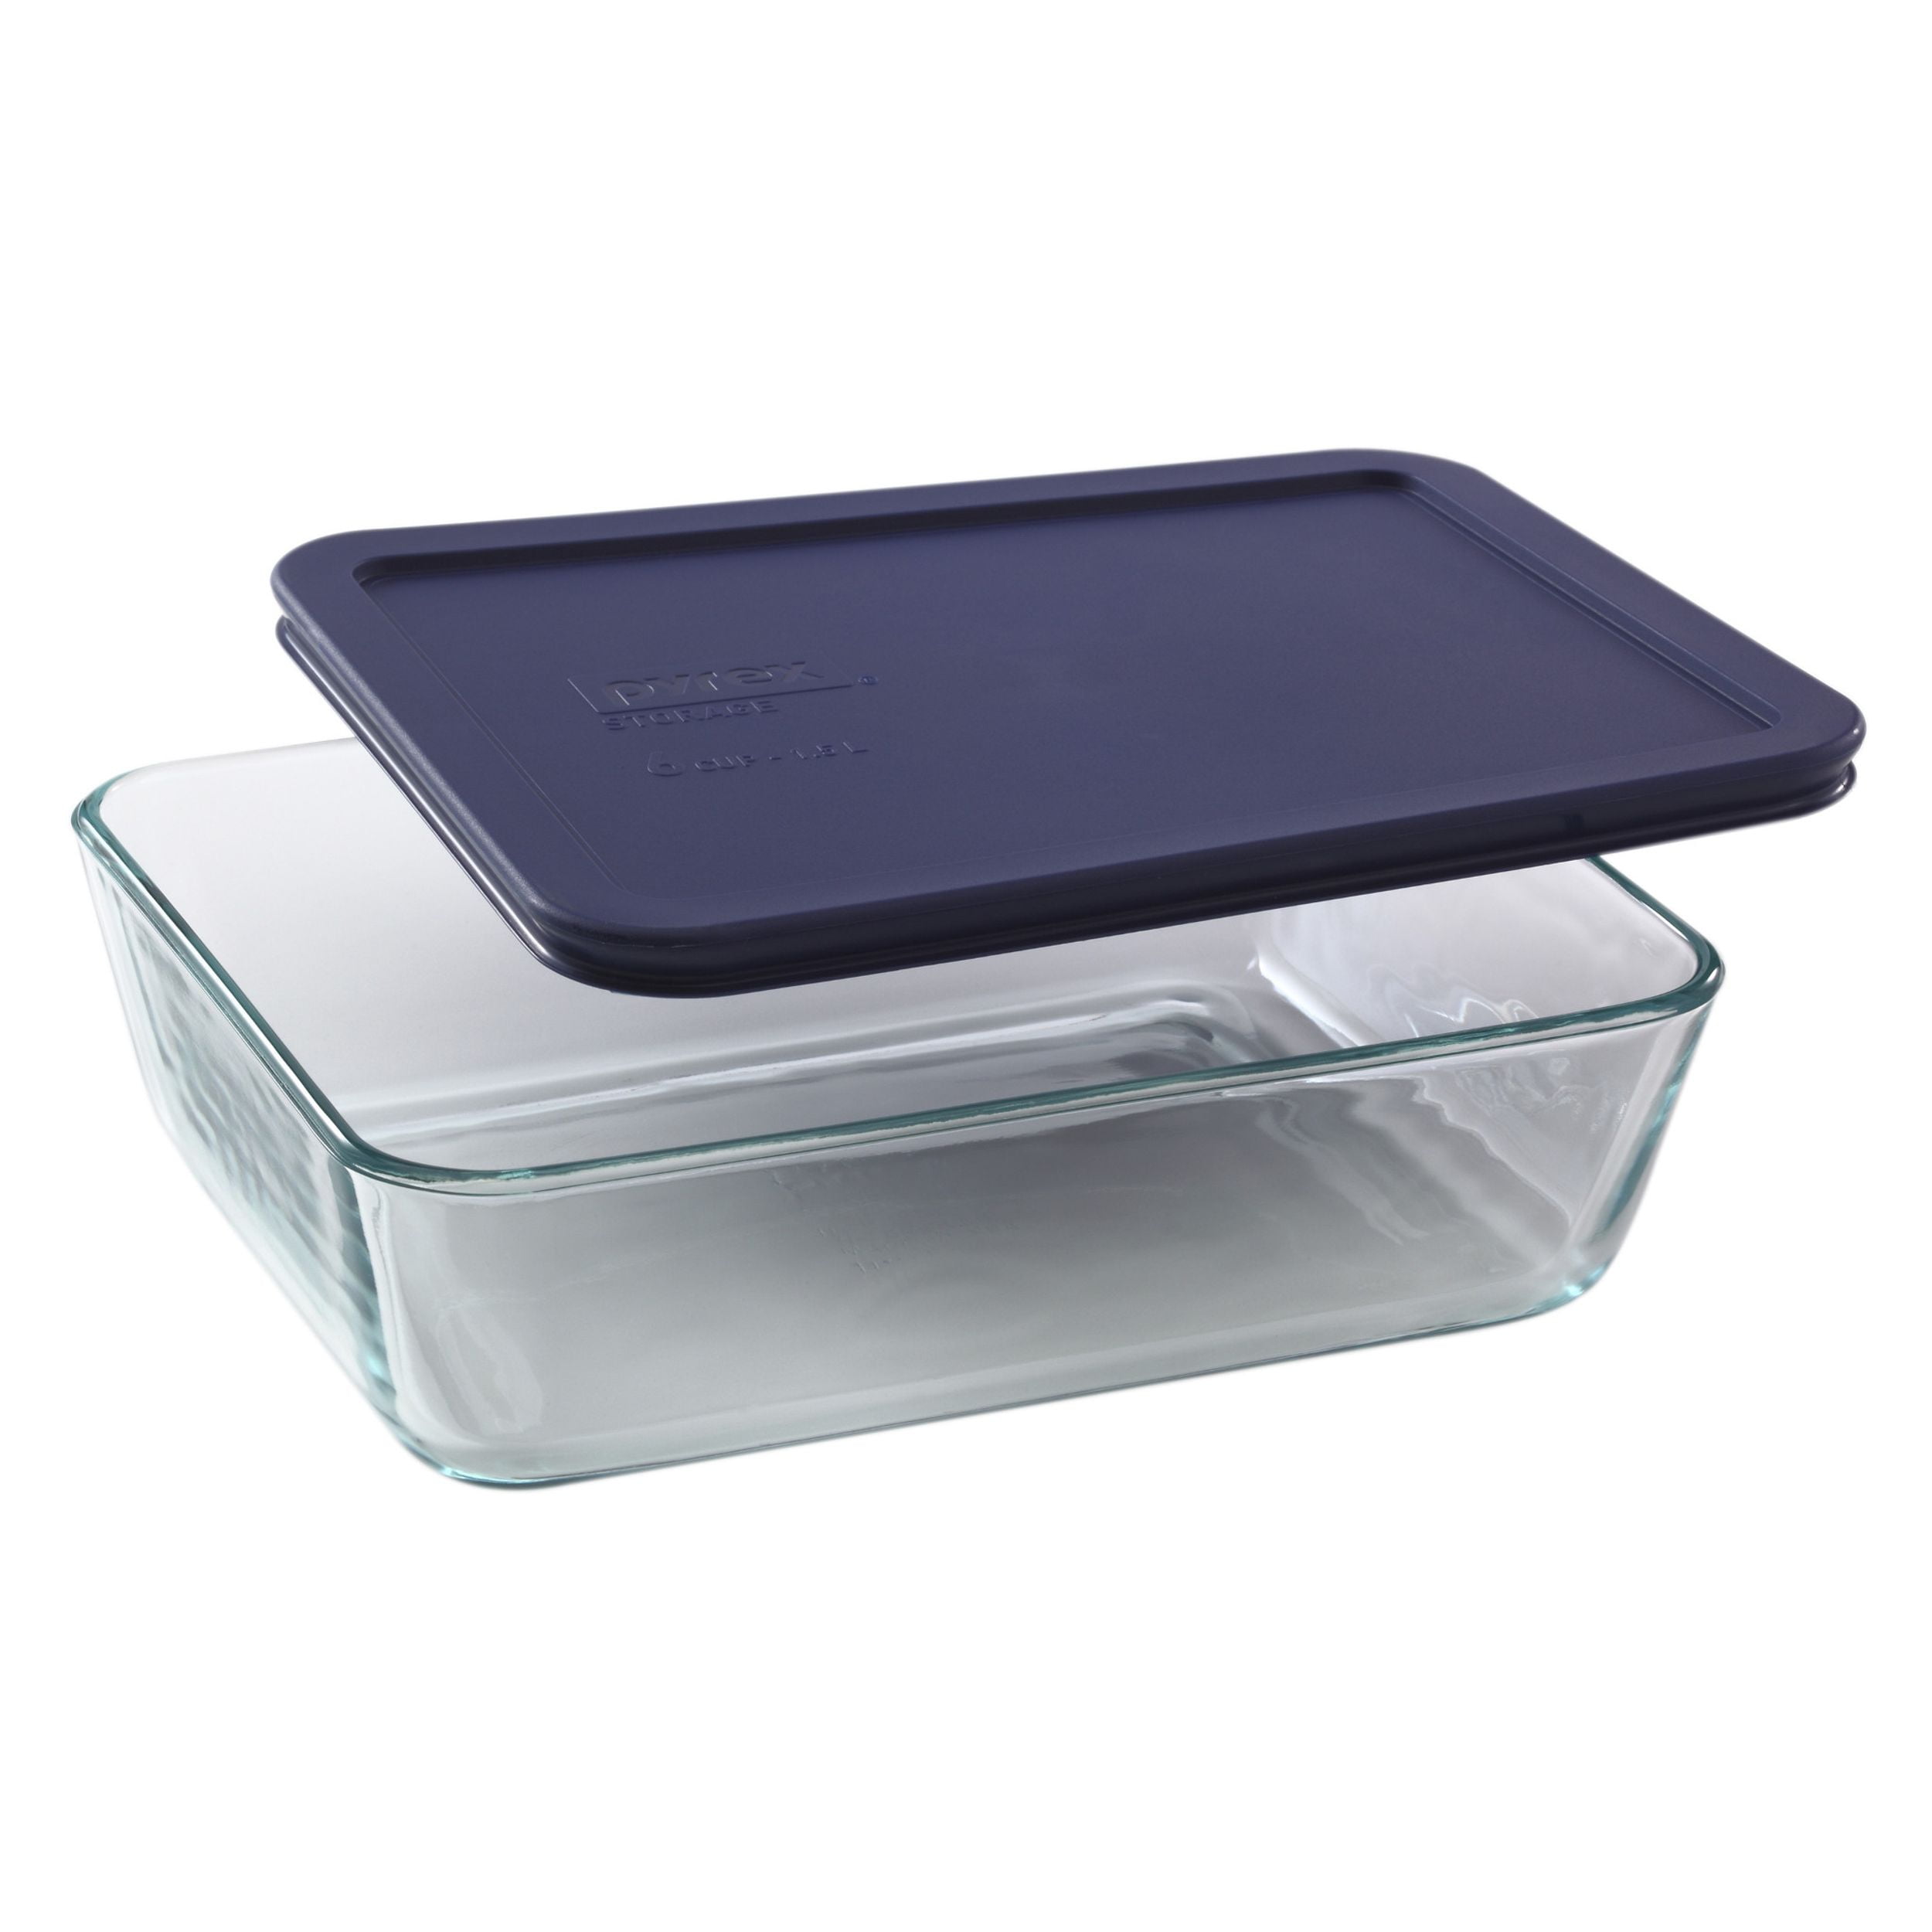  Pyrex Simply Store 6-Pc Glass Food Storage Container Set with  Lids, 3-Cup, 6-Cup, & 11-Cup Rectangular Meal Prep Containers with Lid,  BPA-Free Lid, Dishwasher, Microwave and Freezer Safe